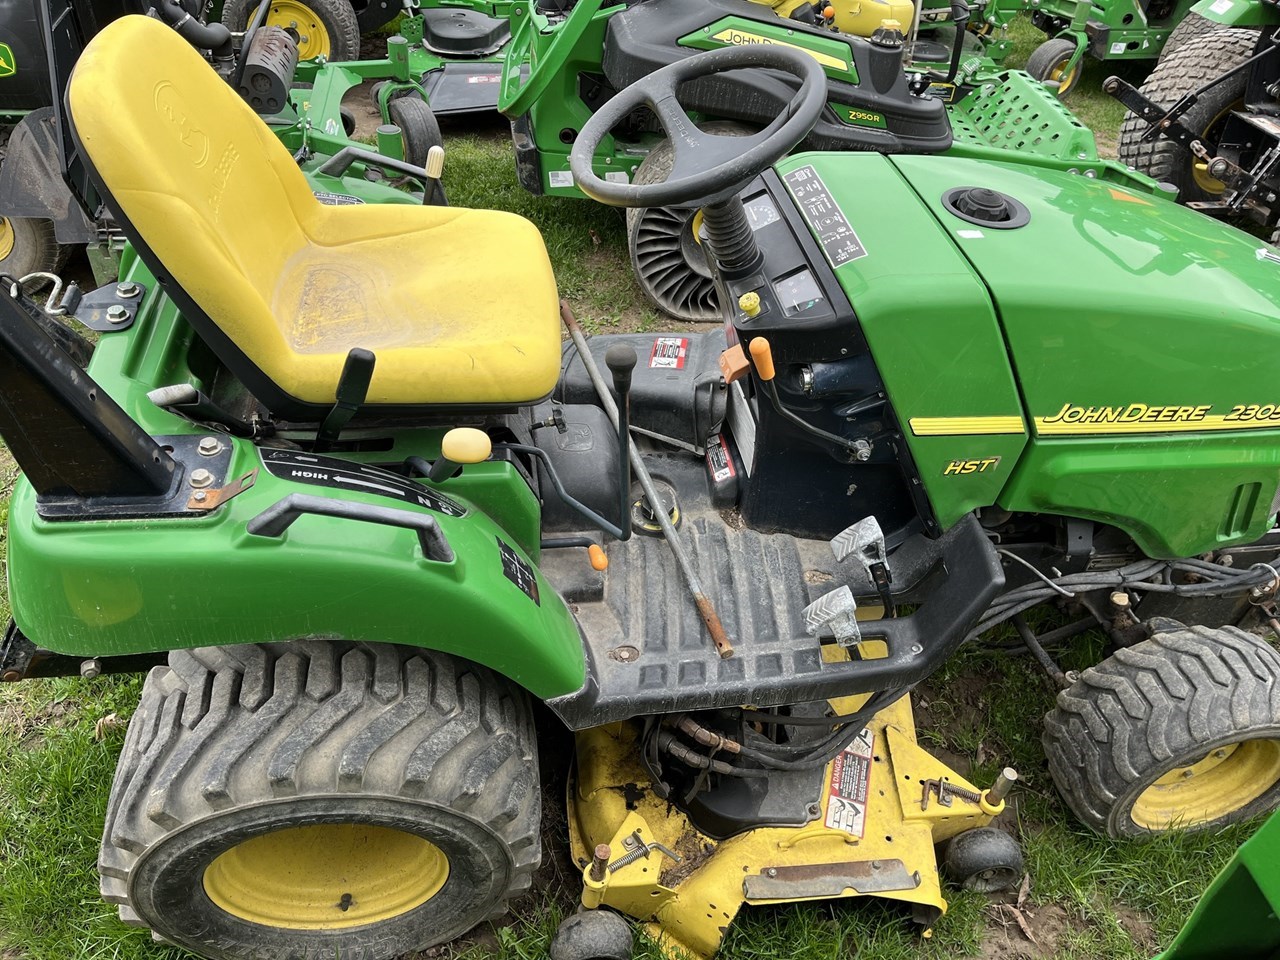 2008 John Deere 2305 Tractor - Compact Utility For Sale